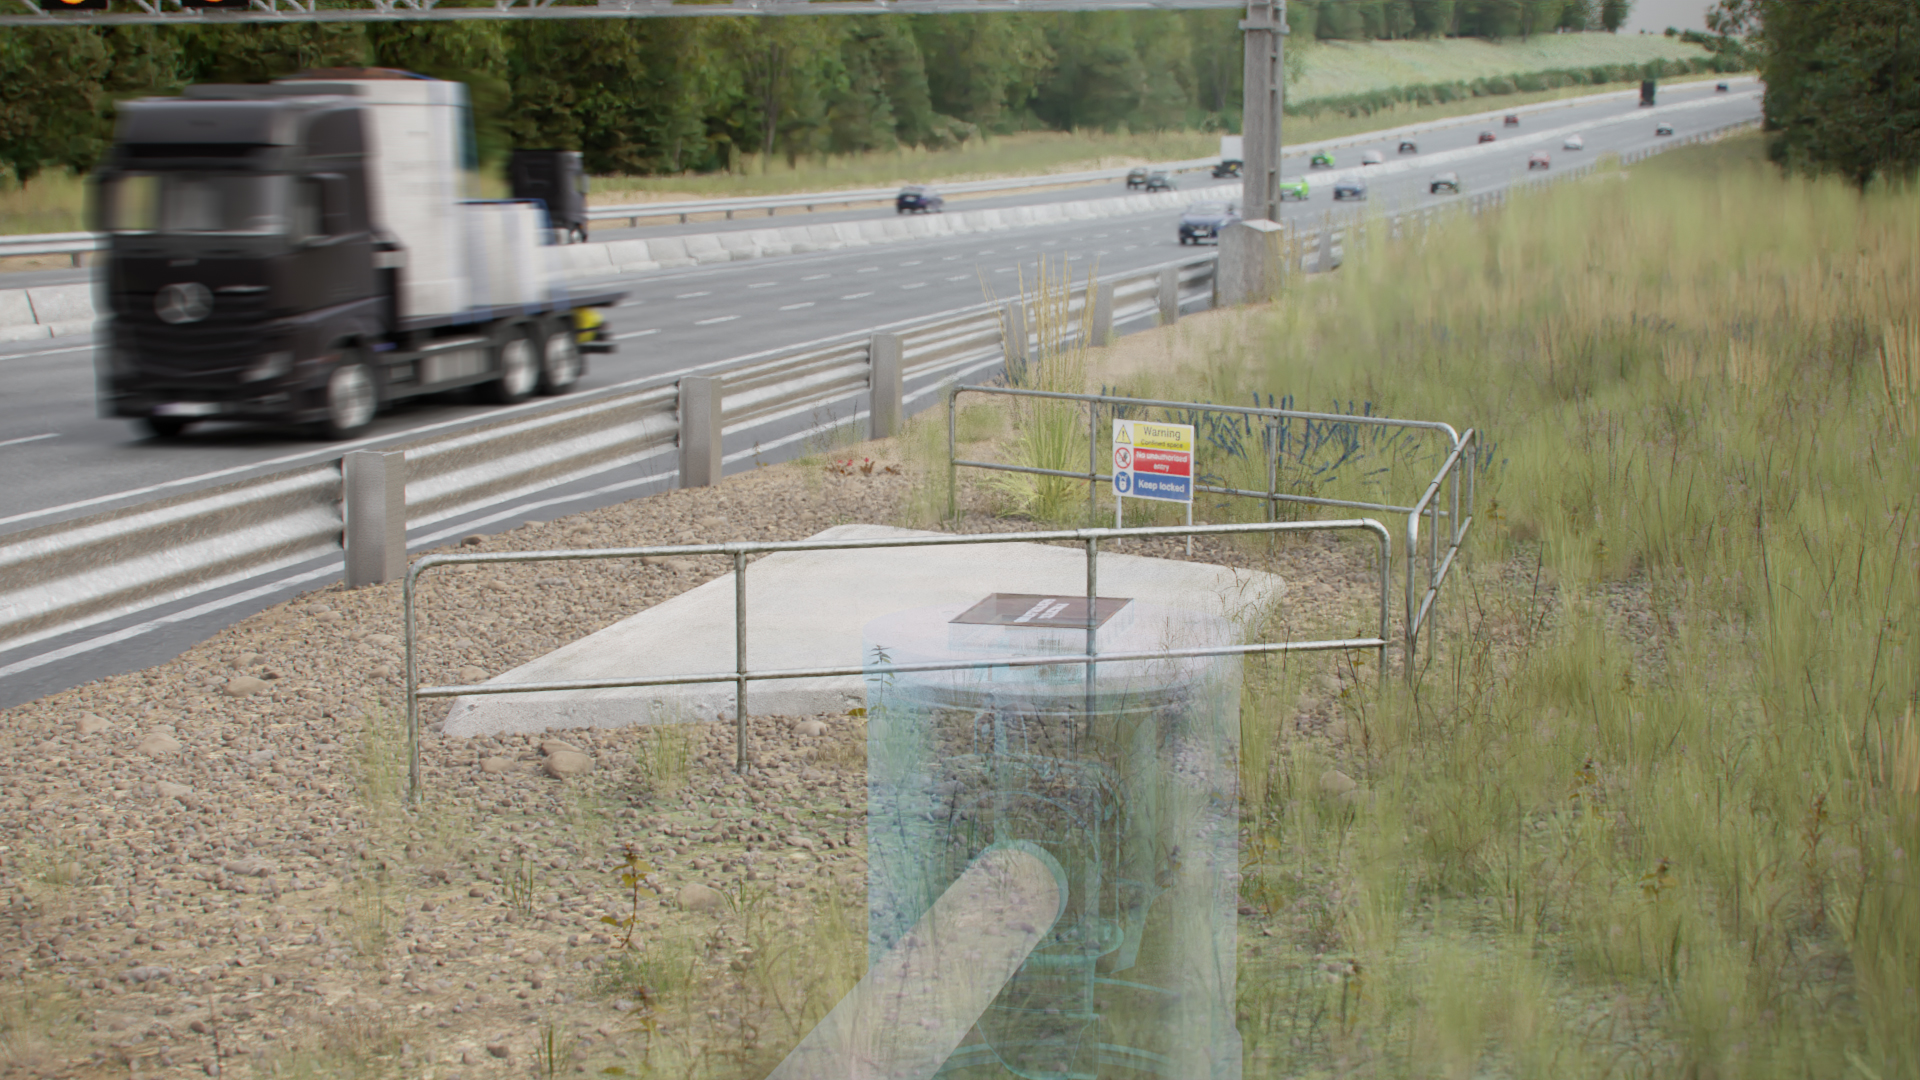 A picture showing an underground flood defence system next to a motorway